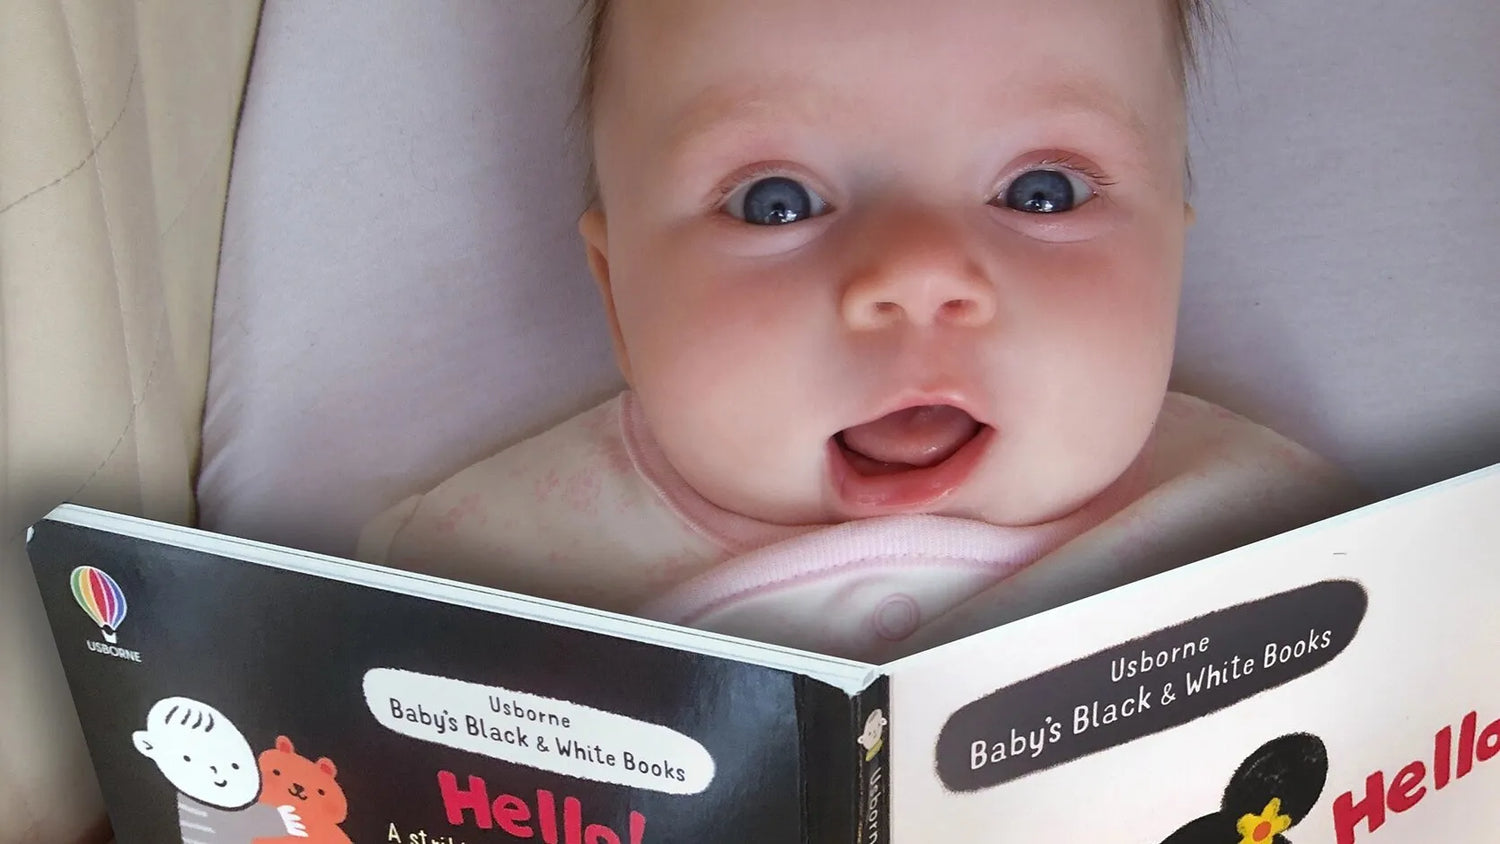 Why black and white books are perfect for babies